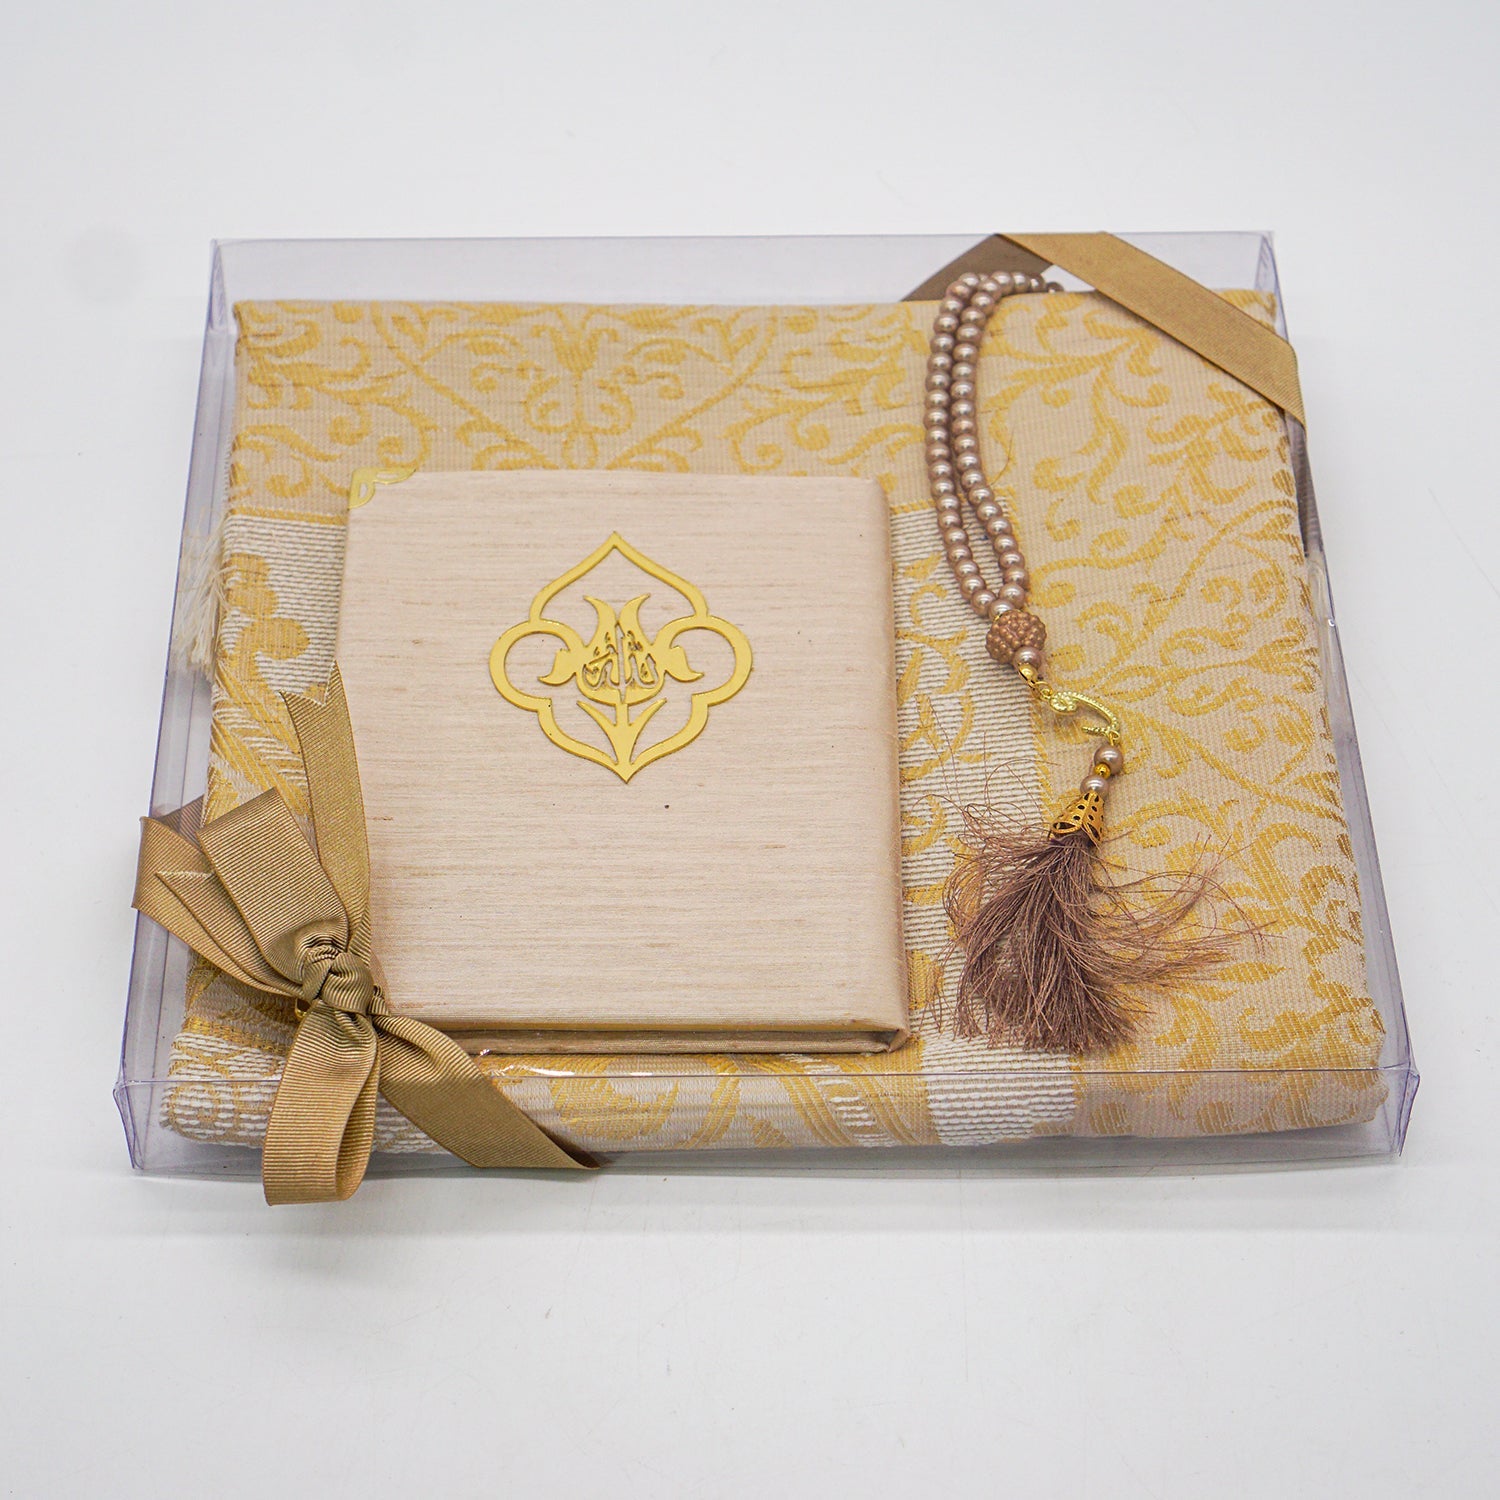 Prayer Mat Gift Set With Prayer Beads and Surah Book - A Beautiful Gift for Any Occasion-almanaar Islamic Store